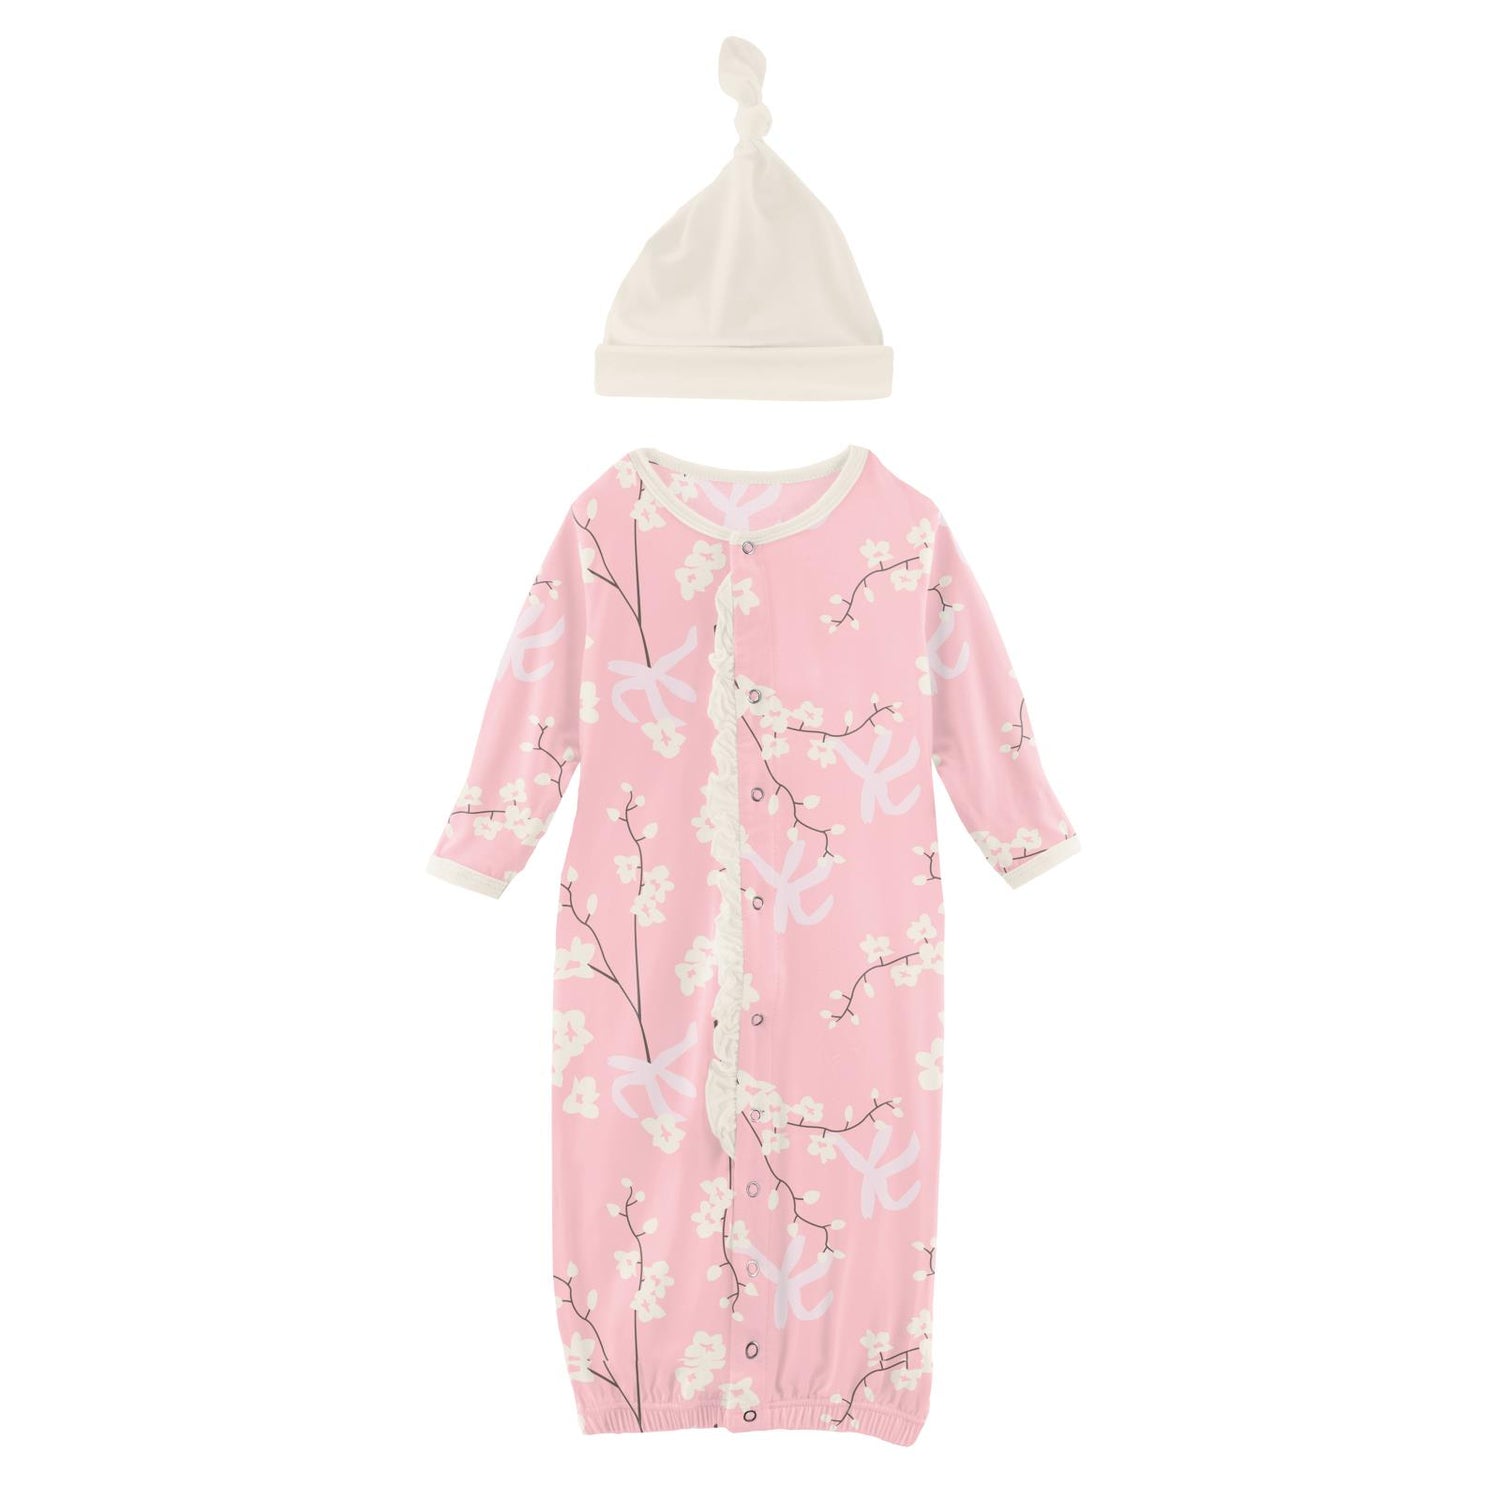 Print Ruffle Layette Gown Converter & Single Knot Hat Set in Lotus Orchid Print